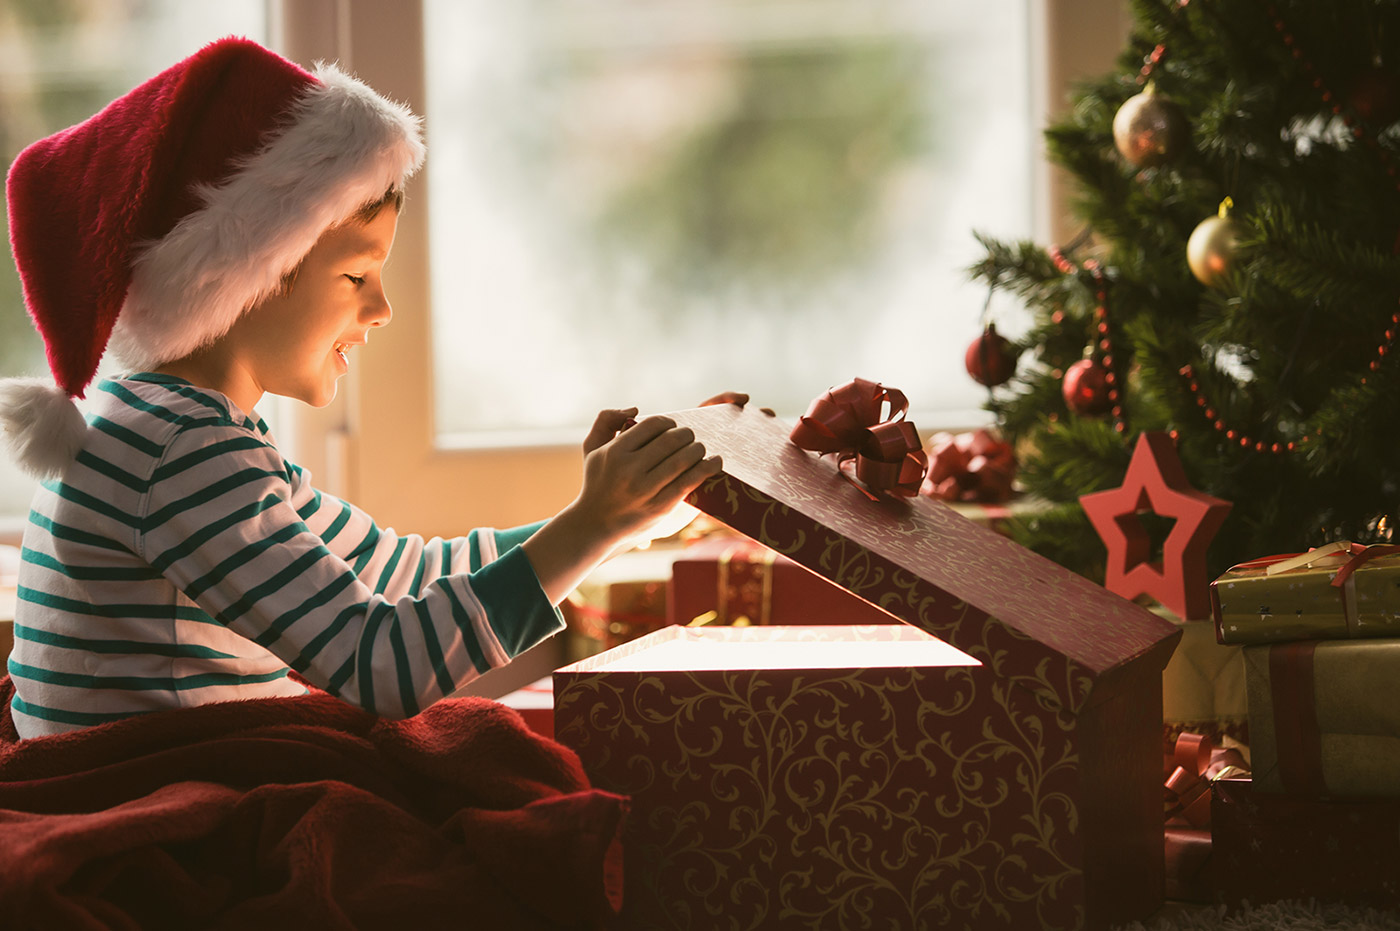 A little boy in pajamas and a Santa hat, opening up a Christmas present by the tree.